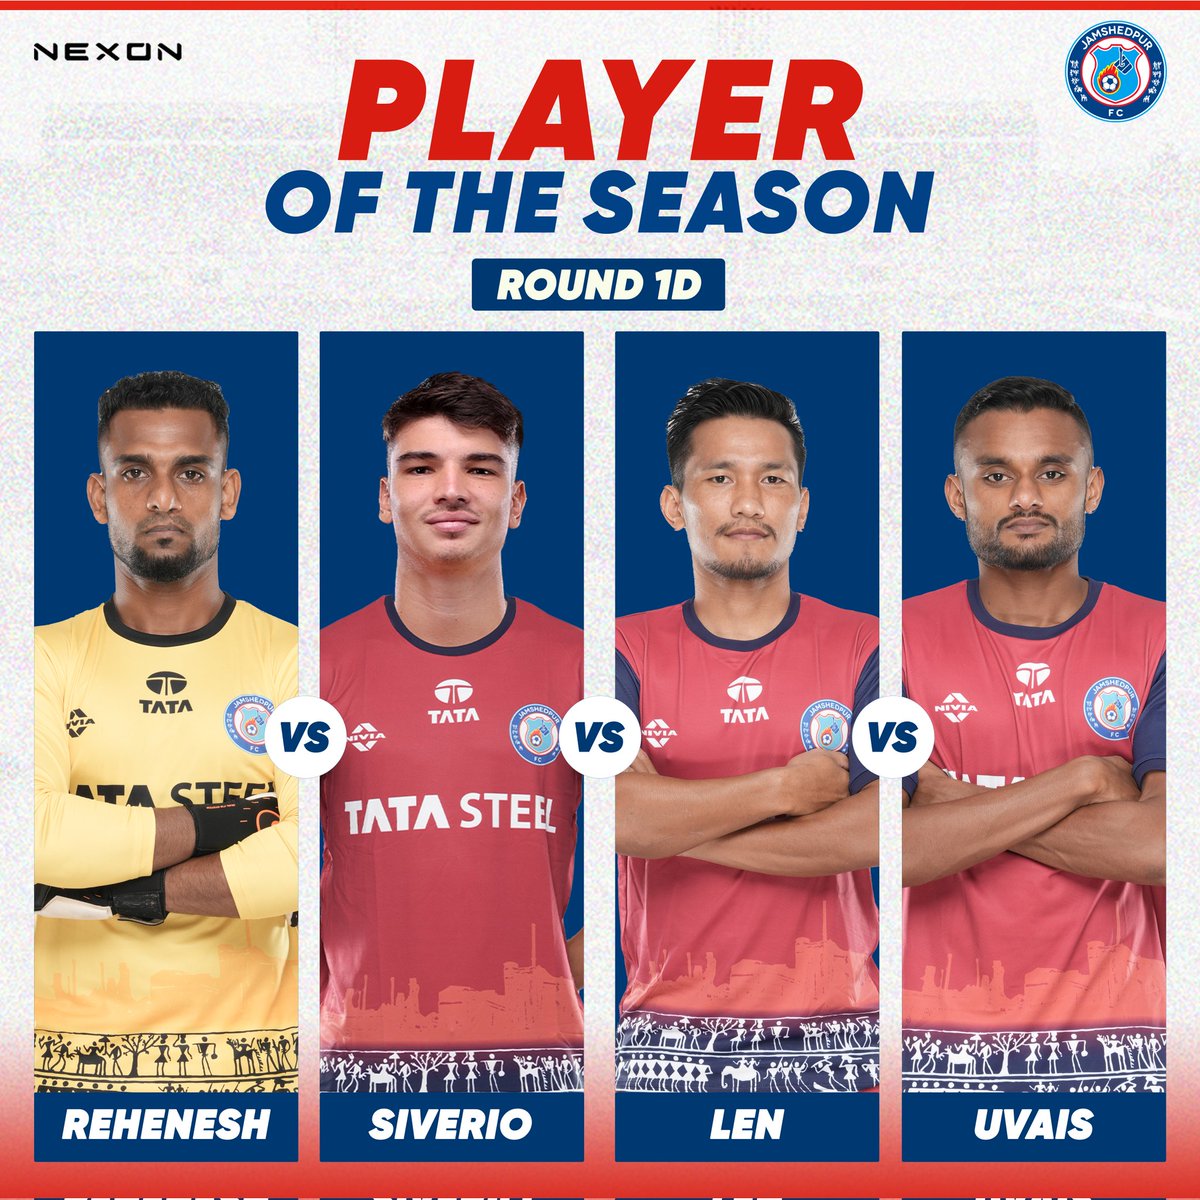 Who will rise to the top? 🌟 It's time to cast your vote for the Nexon JFC Player of the Season! Meet the 4 contenders of Round 1D and let your voice be heard. Every vote counts in deciding our ultimate champion! ⚽🏆 #JamKeKhelo #NexonJFCPlayerOfTheSeason #football…